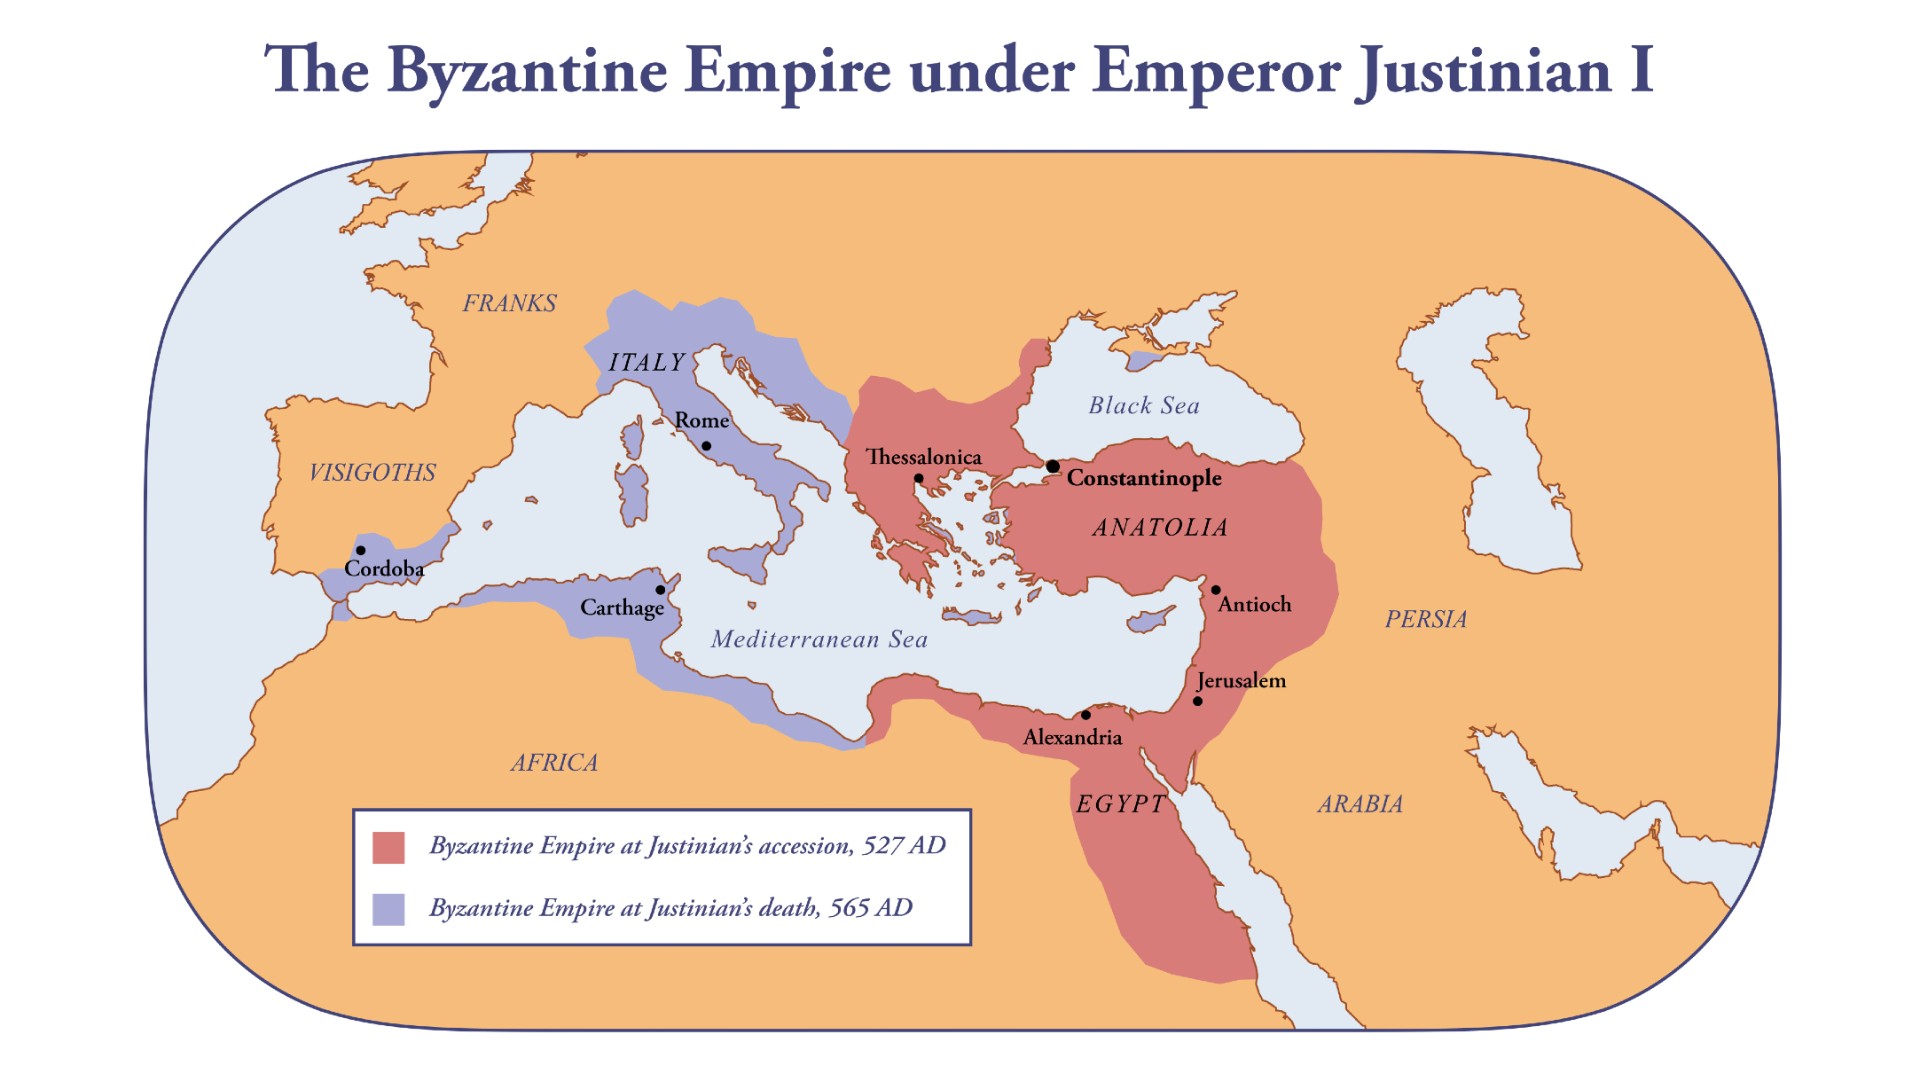 A map of the Byzantine Empire under Emperor Justinian I, before his accession and after his death.